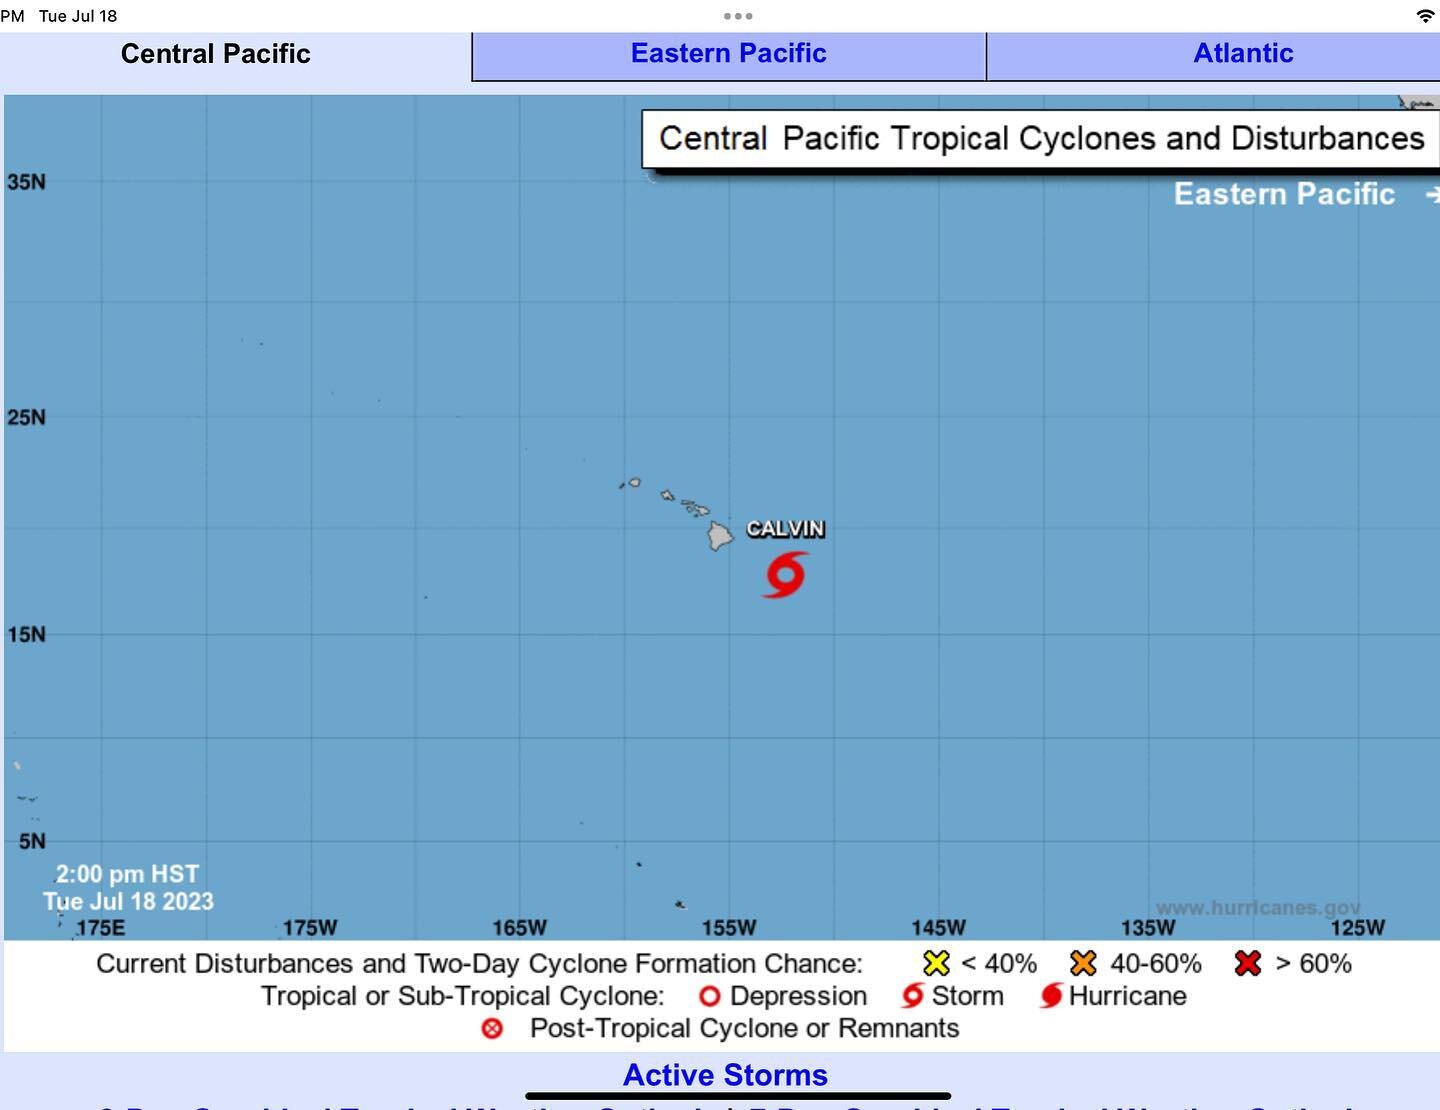 Tropical storm Calvin expected to hit tomorrow morning 7/19 on the Big Island. It&rsquo;s very windy out there right now!  #hawaiimilitarylife808 #marinescorps #schofieldbarracks #mcbh #jbphh #fortshafter #25thidcg #usaghawaii #hawaiiarmynationalguar